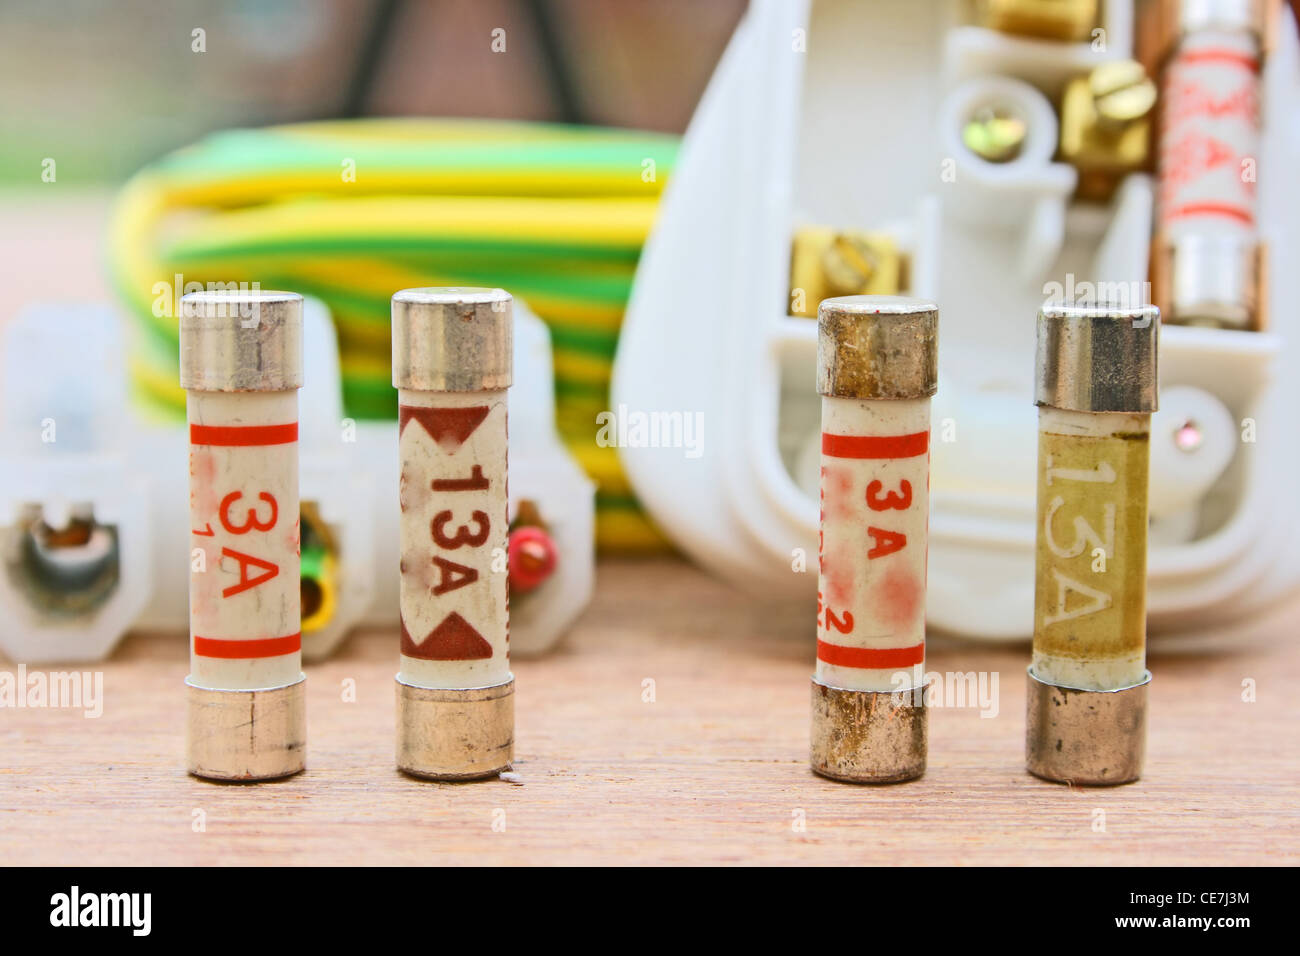 Electrical fuse with a three pin plug. Stock Photo